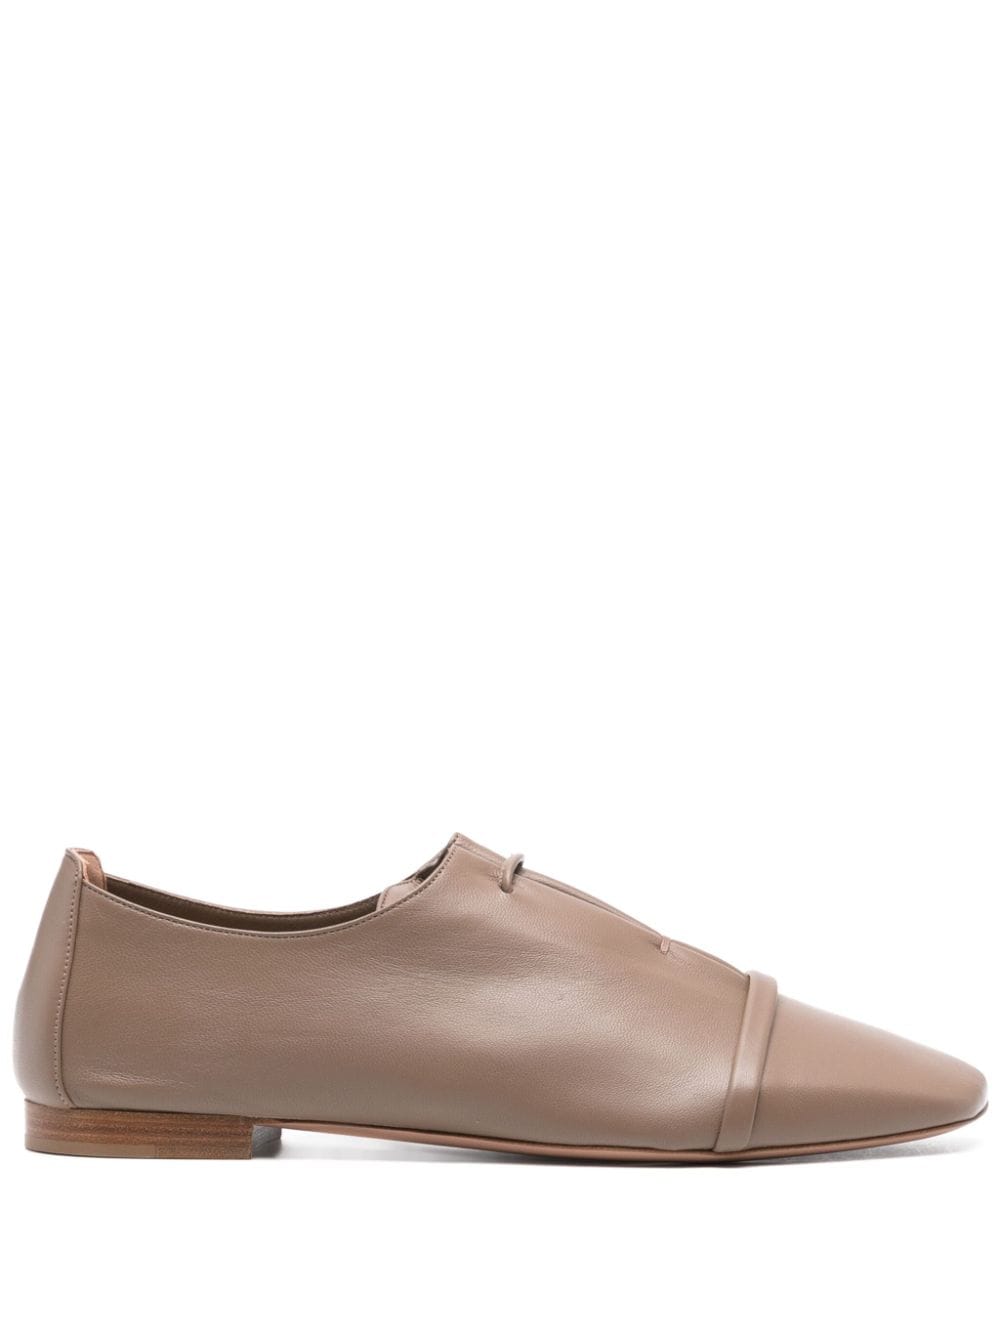 Malone Souliers Jean leather oxford shoes - Neutrals von Malone Souliers